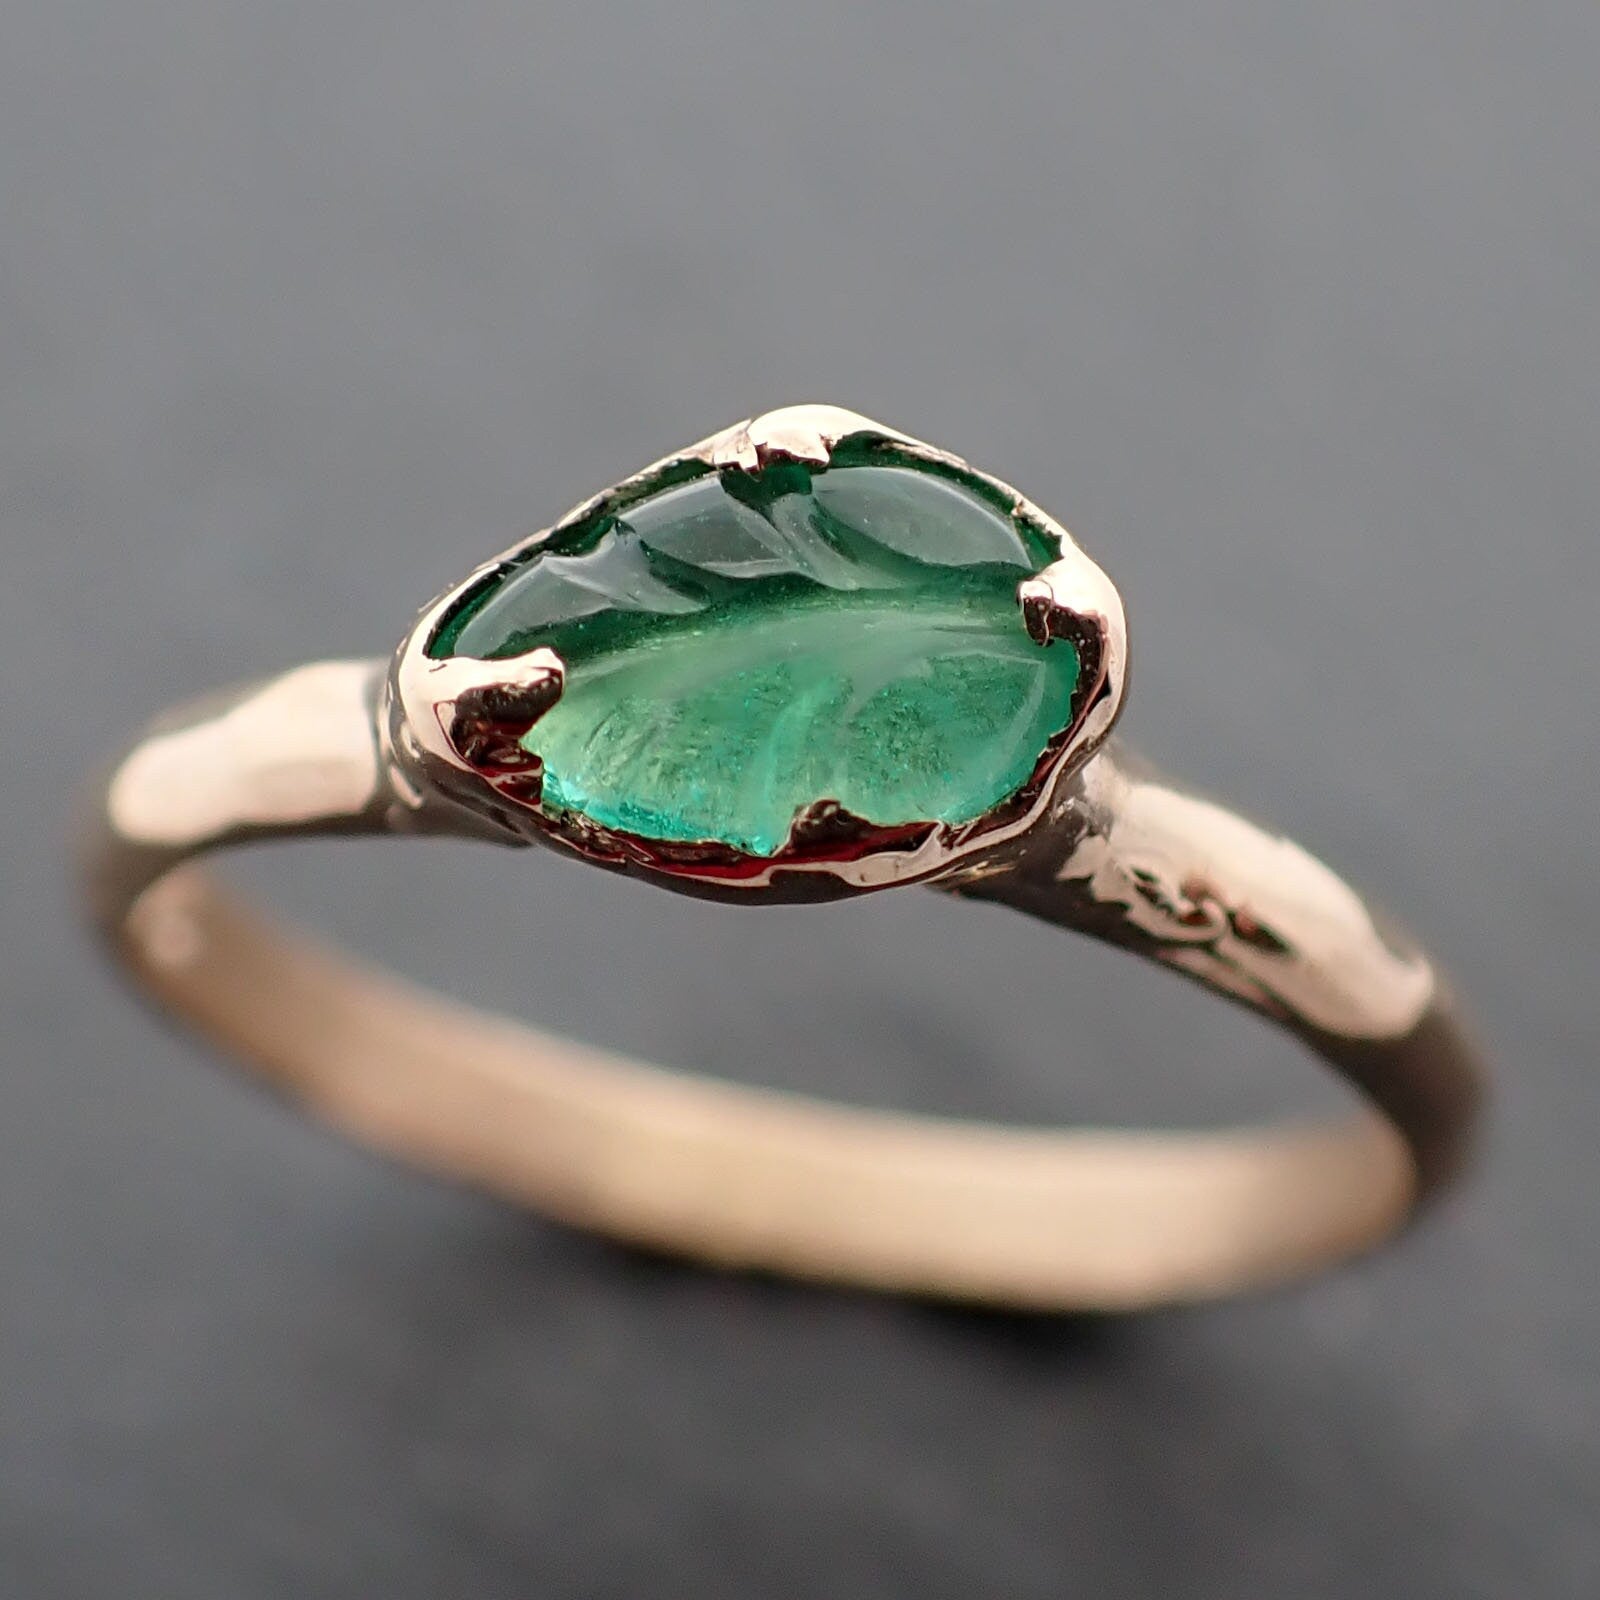 Carved Leaf Emerald Solitaire yellow 14k Gold Ring Birthstone One Of a Kind Gemstone Ring Recycled 3385